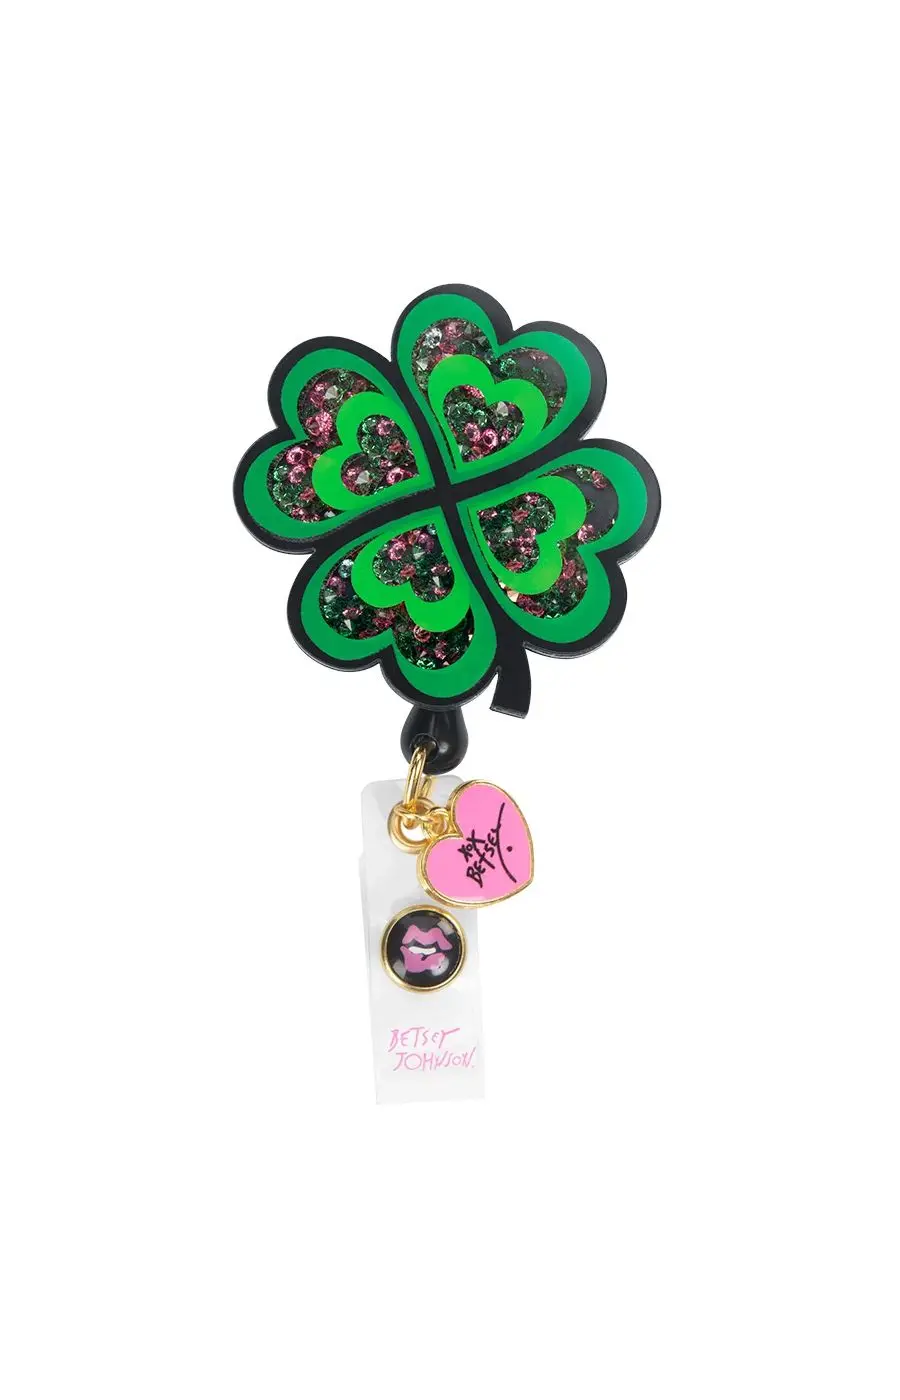 Buy Betsey Retractable Badges - koi Betsey Johnson Online at Best